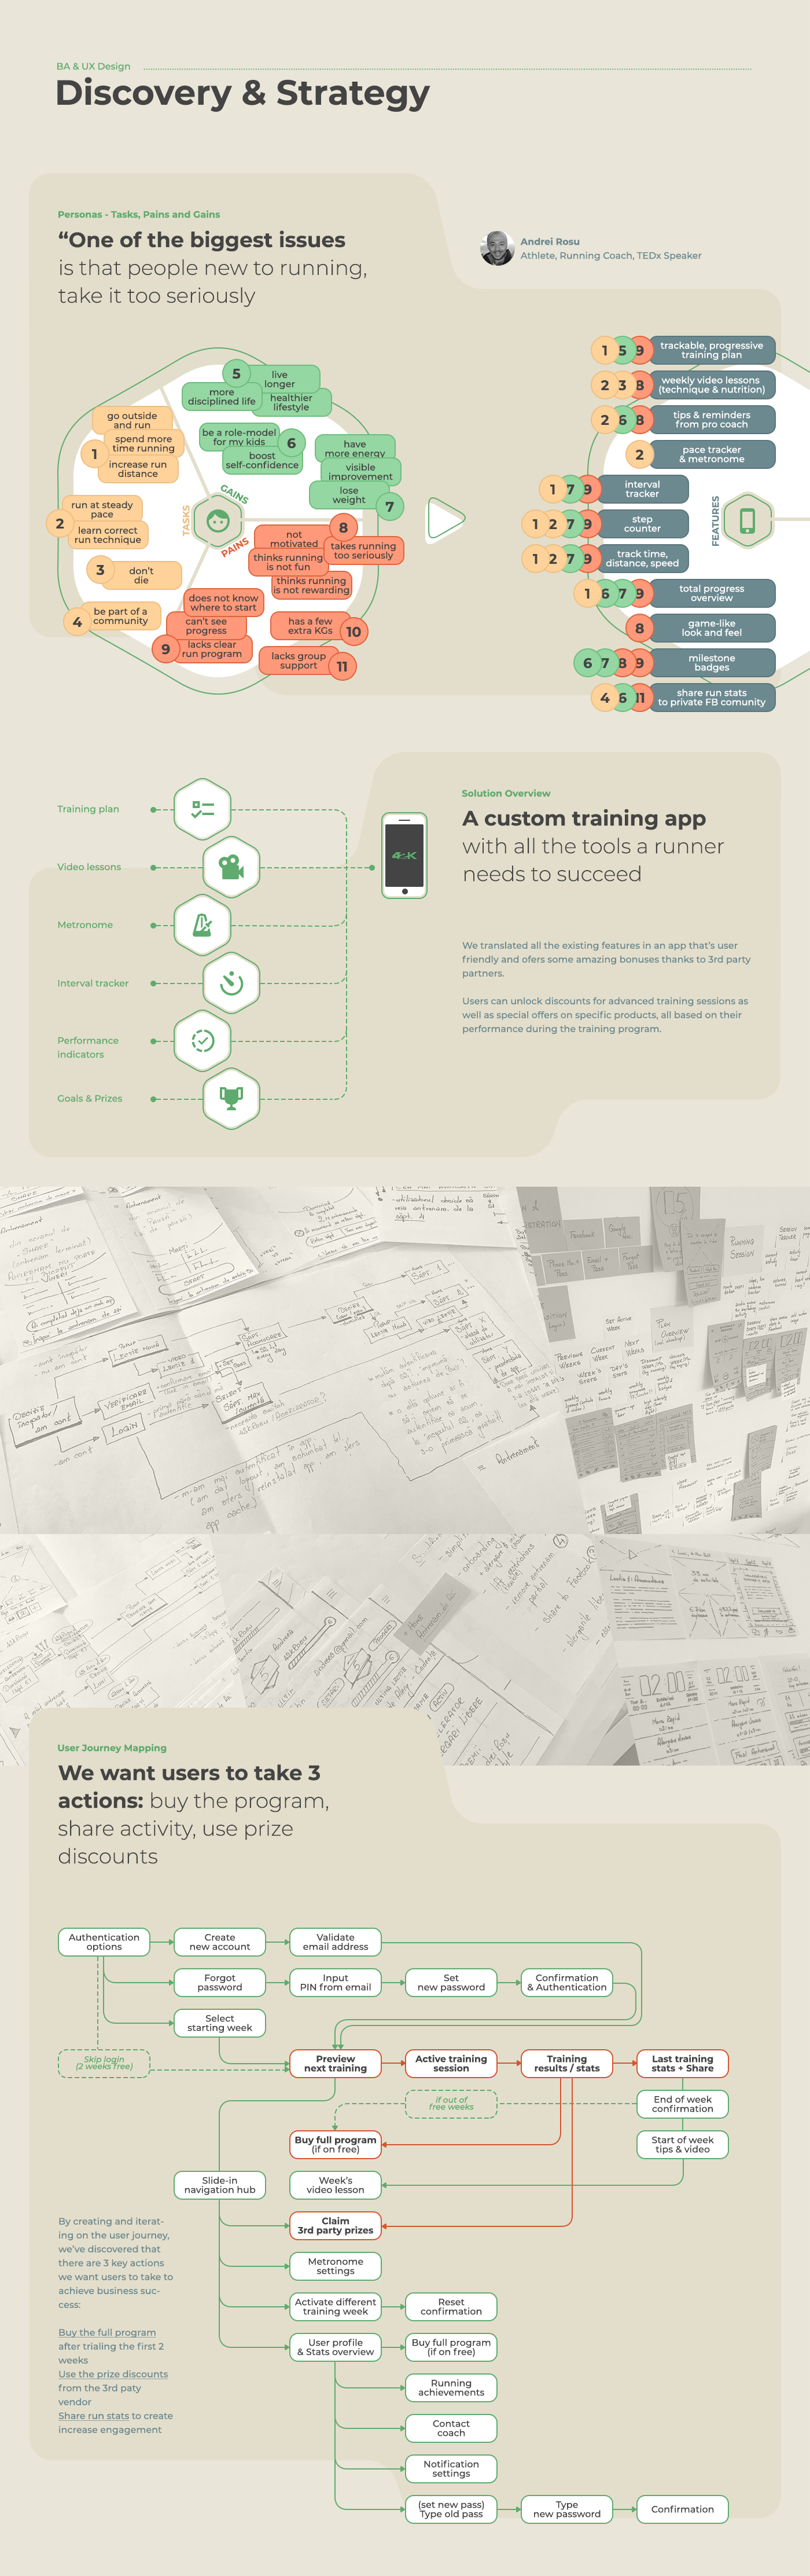 discovery strategy UX design user journey map information architecture  ui design mobile app ios